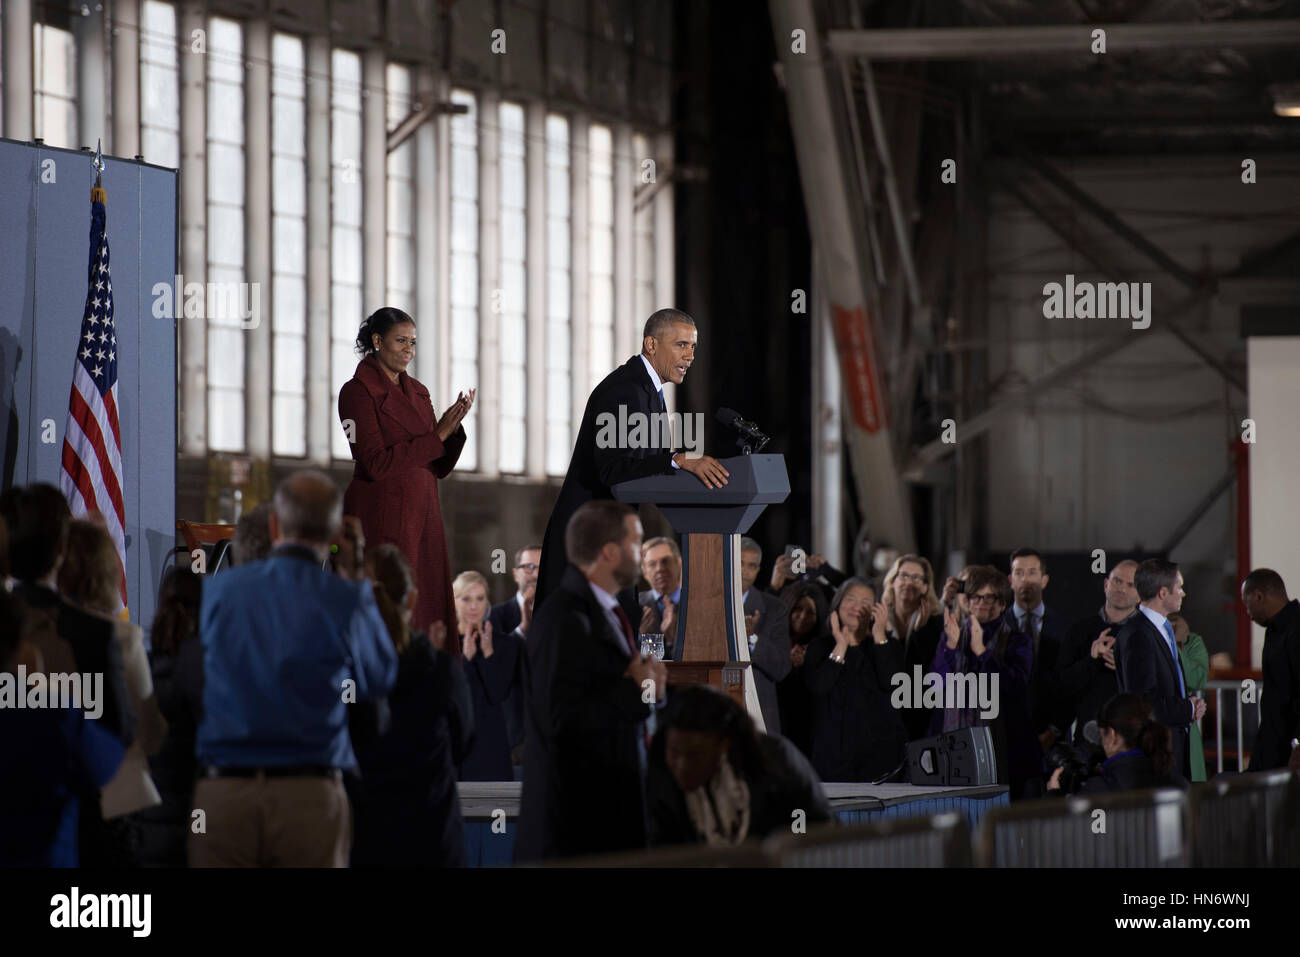 Former U.S. President Barack Obama gives his farewell speech on stage with former First Lady Michelle Obama at Joint Base Andrews January 20, 2017 in Maryland.     (photo by Delano Scott/US Air Force via Planetpix) Stock Photo